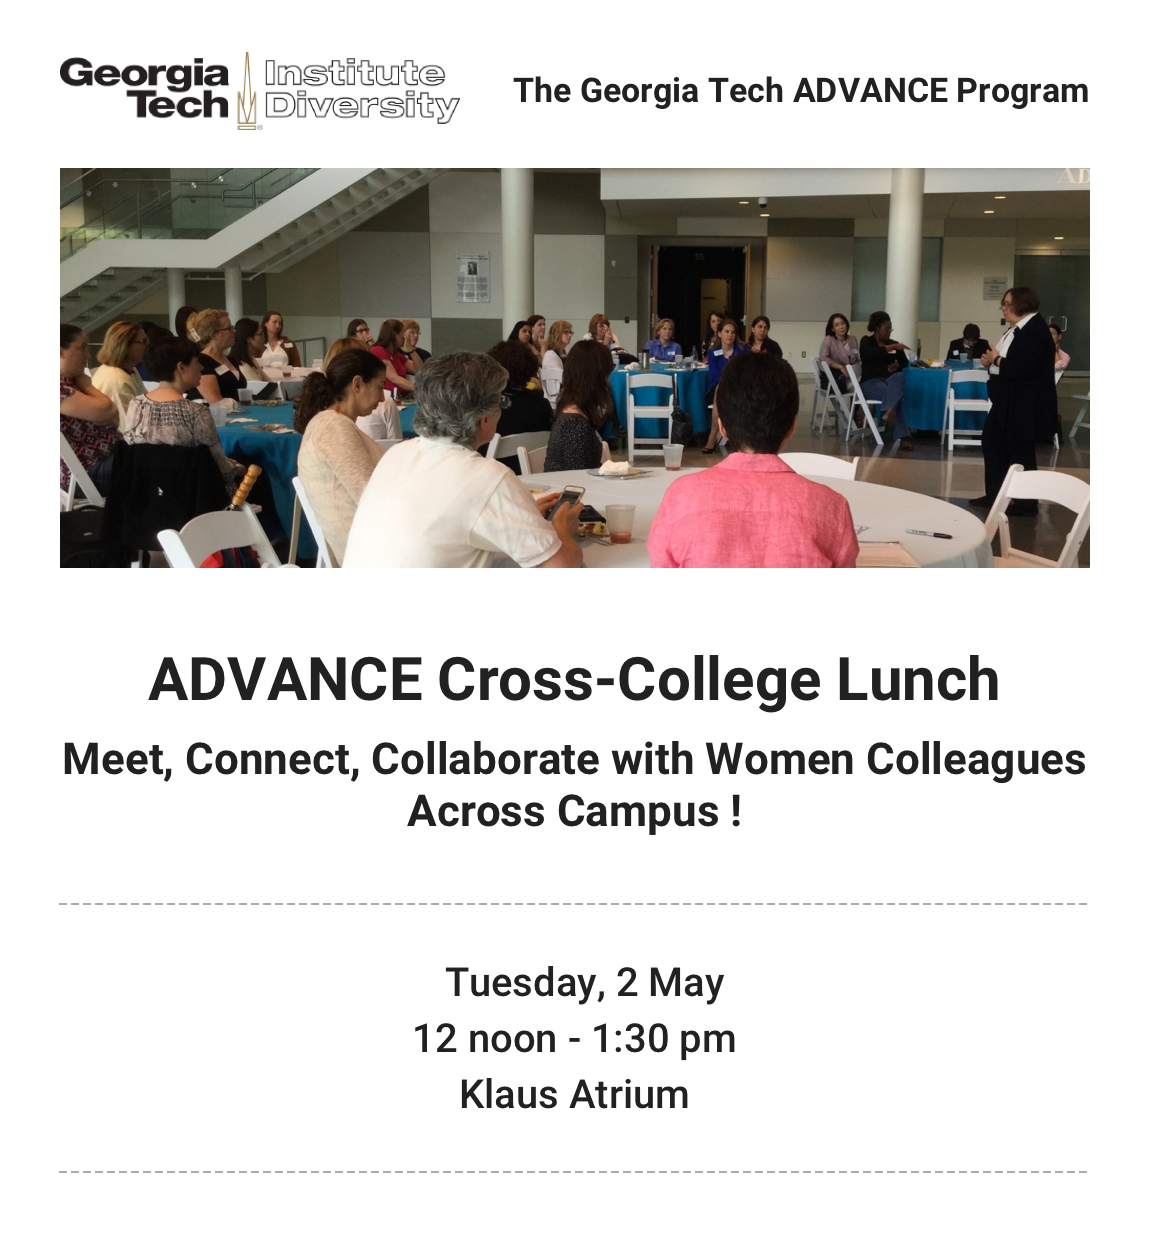 ADVANCE Cross-College Lunch: Meet, Connect, and Collaborate with Women Colleagues Across Campus. Tuesday, May 2 12-1:30. Klaus Atrium